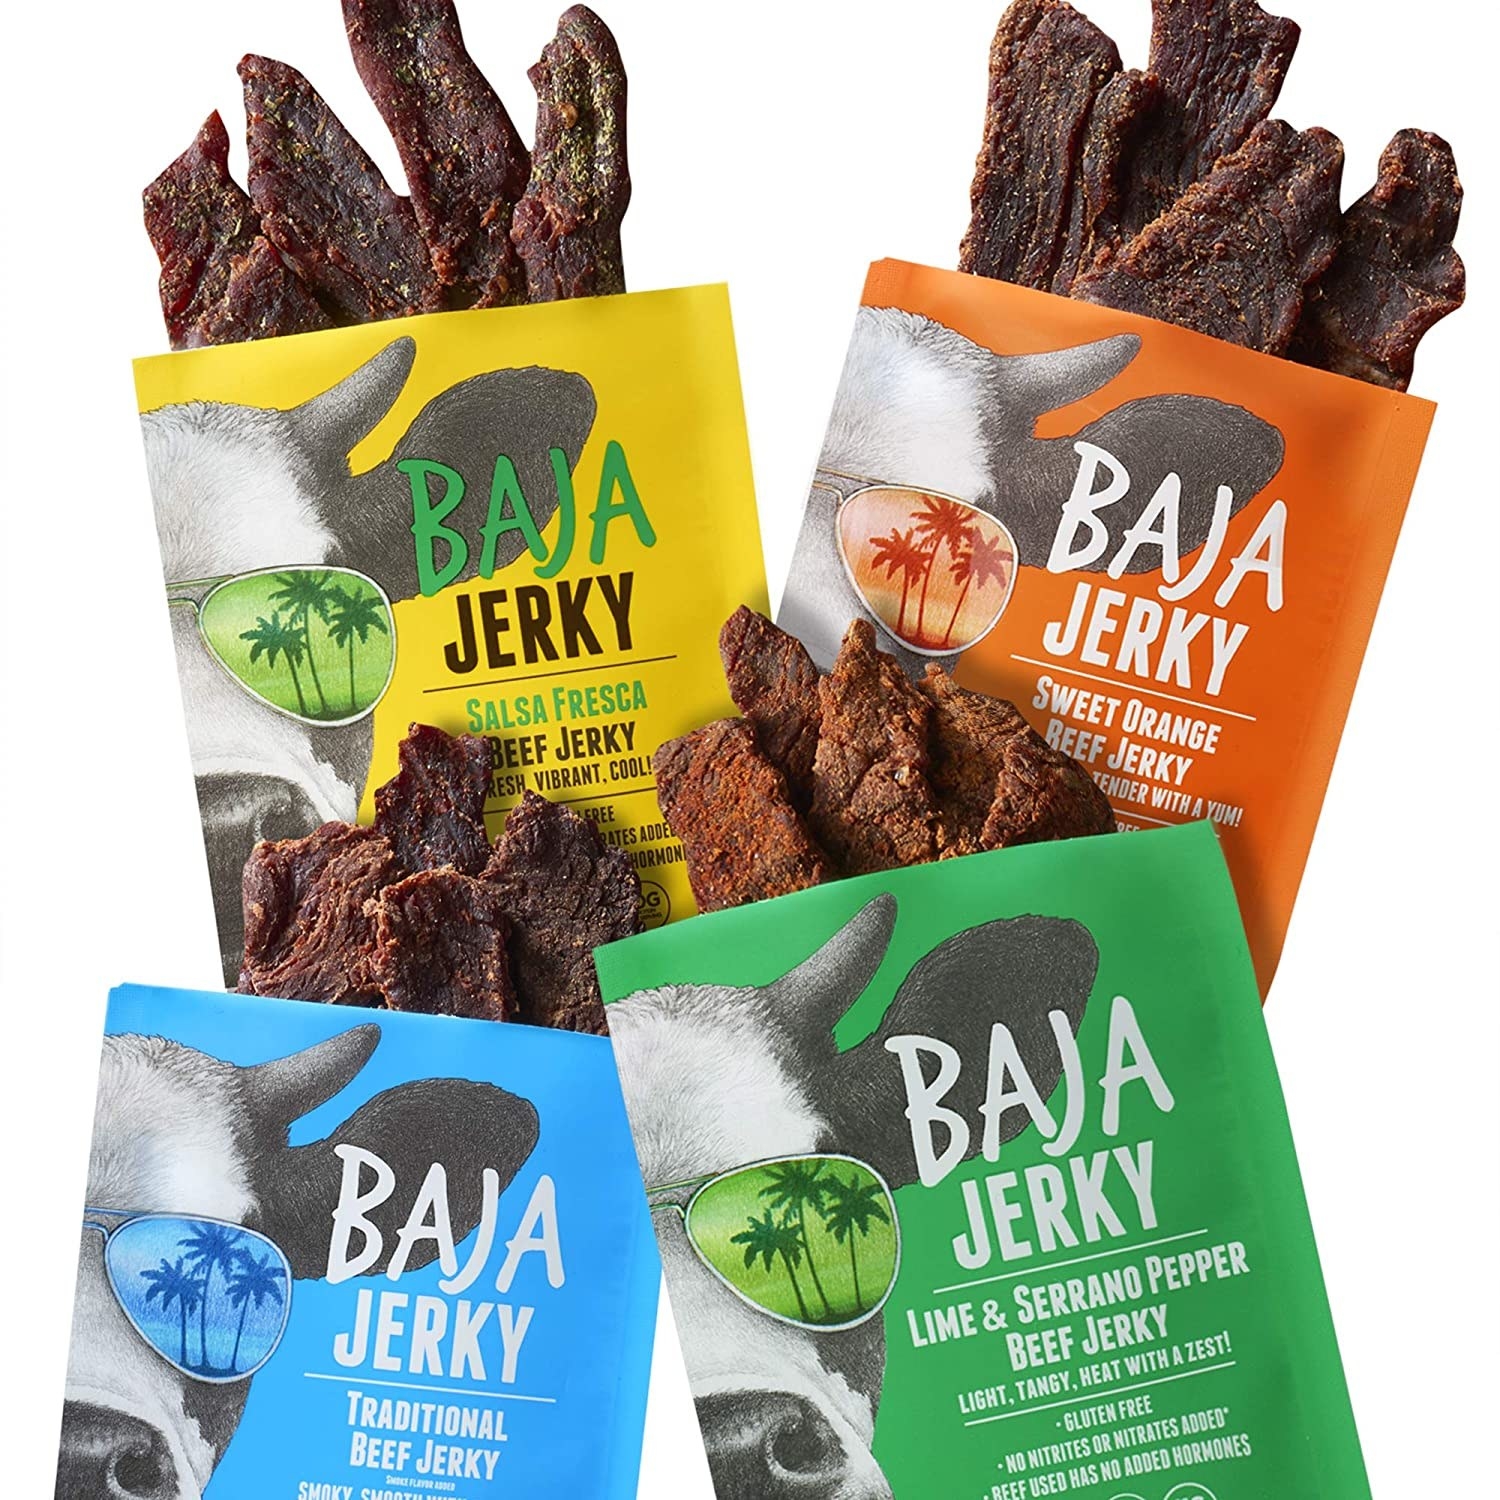 Sample pack of Baja Jerky with the yellow, orange, green and blue bags in clockwise order